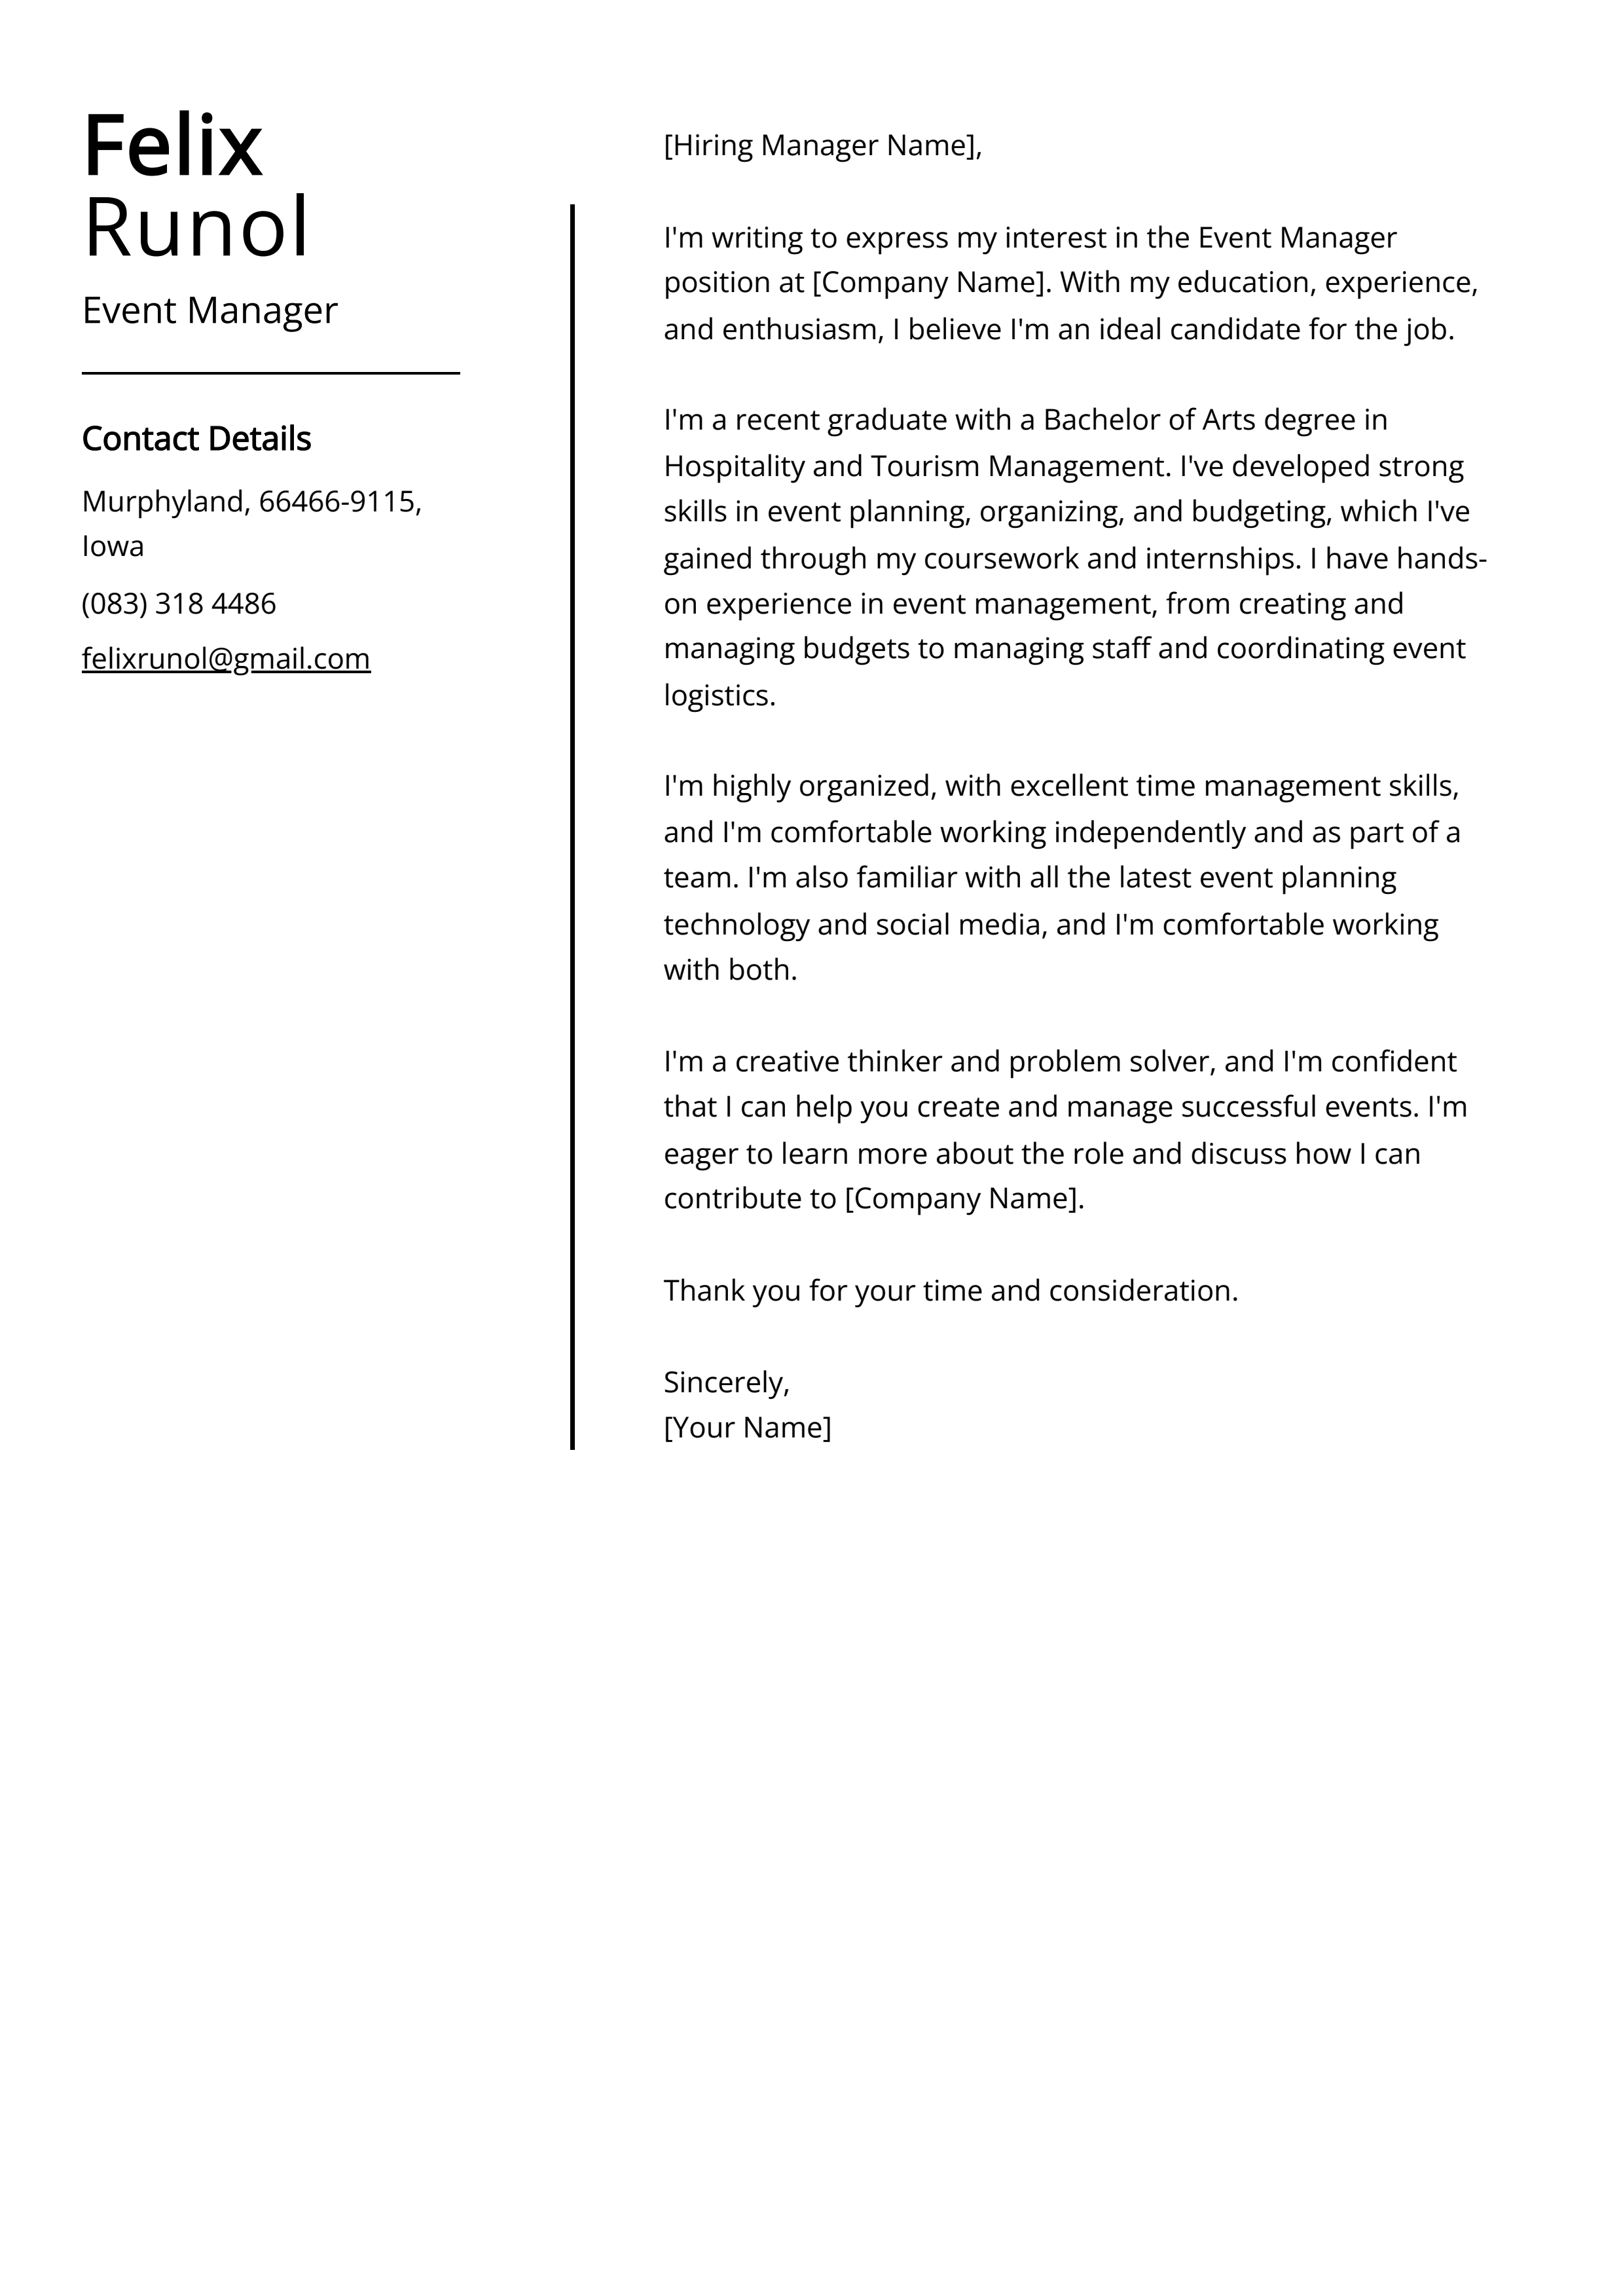 Event Manager Cover Letter Example